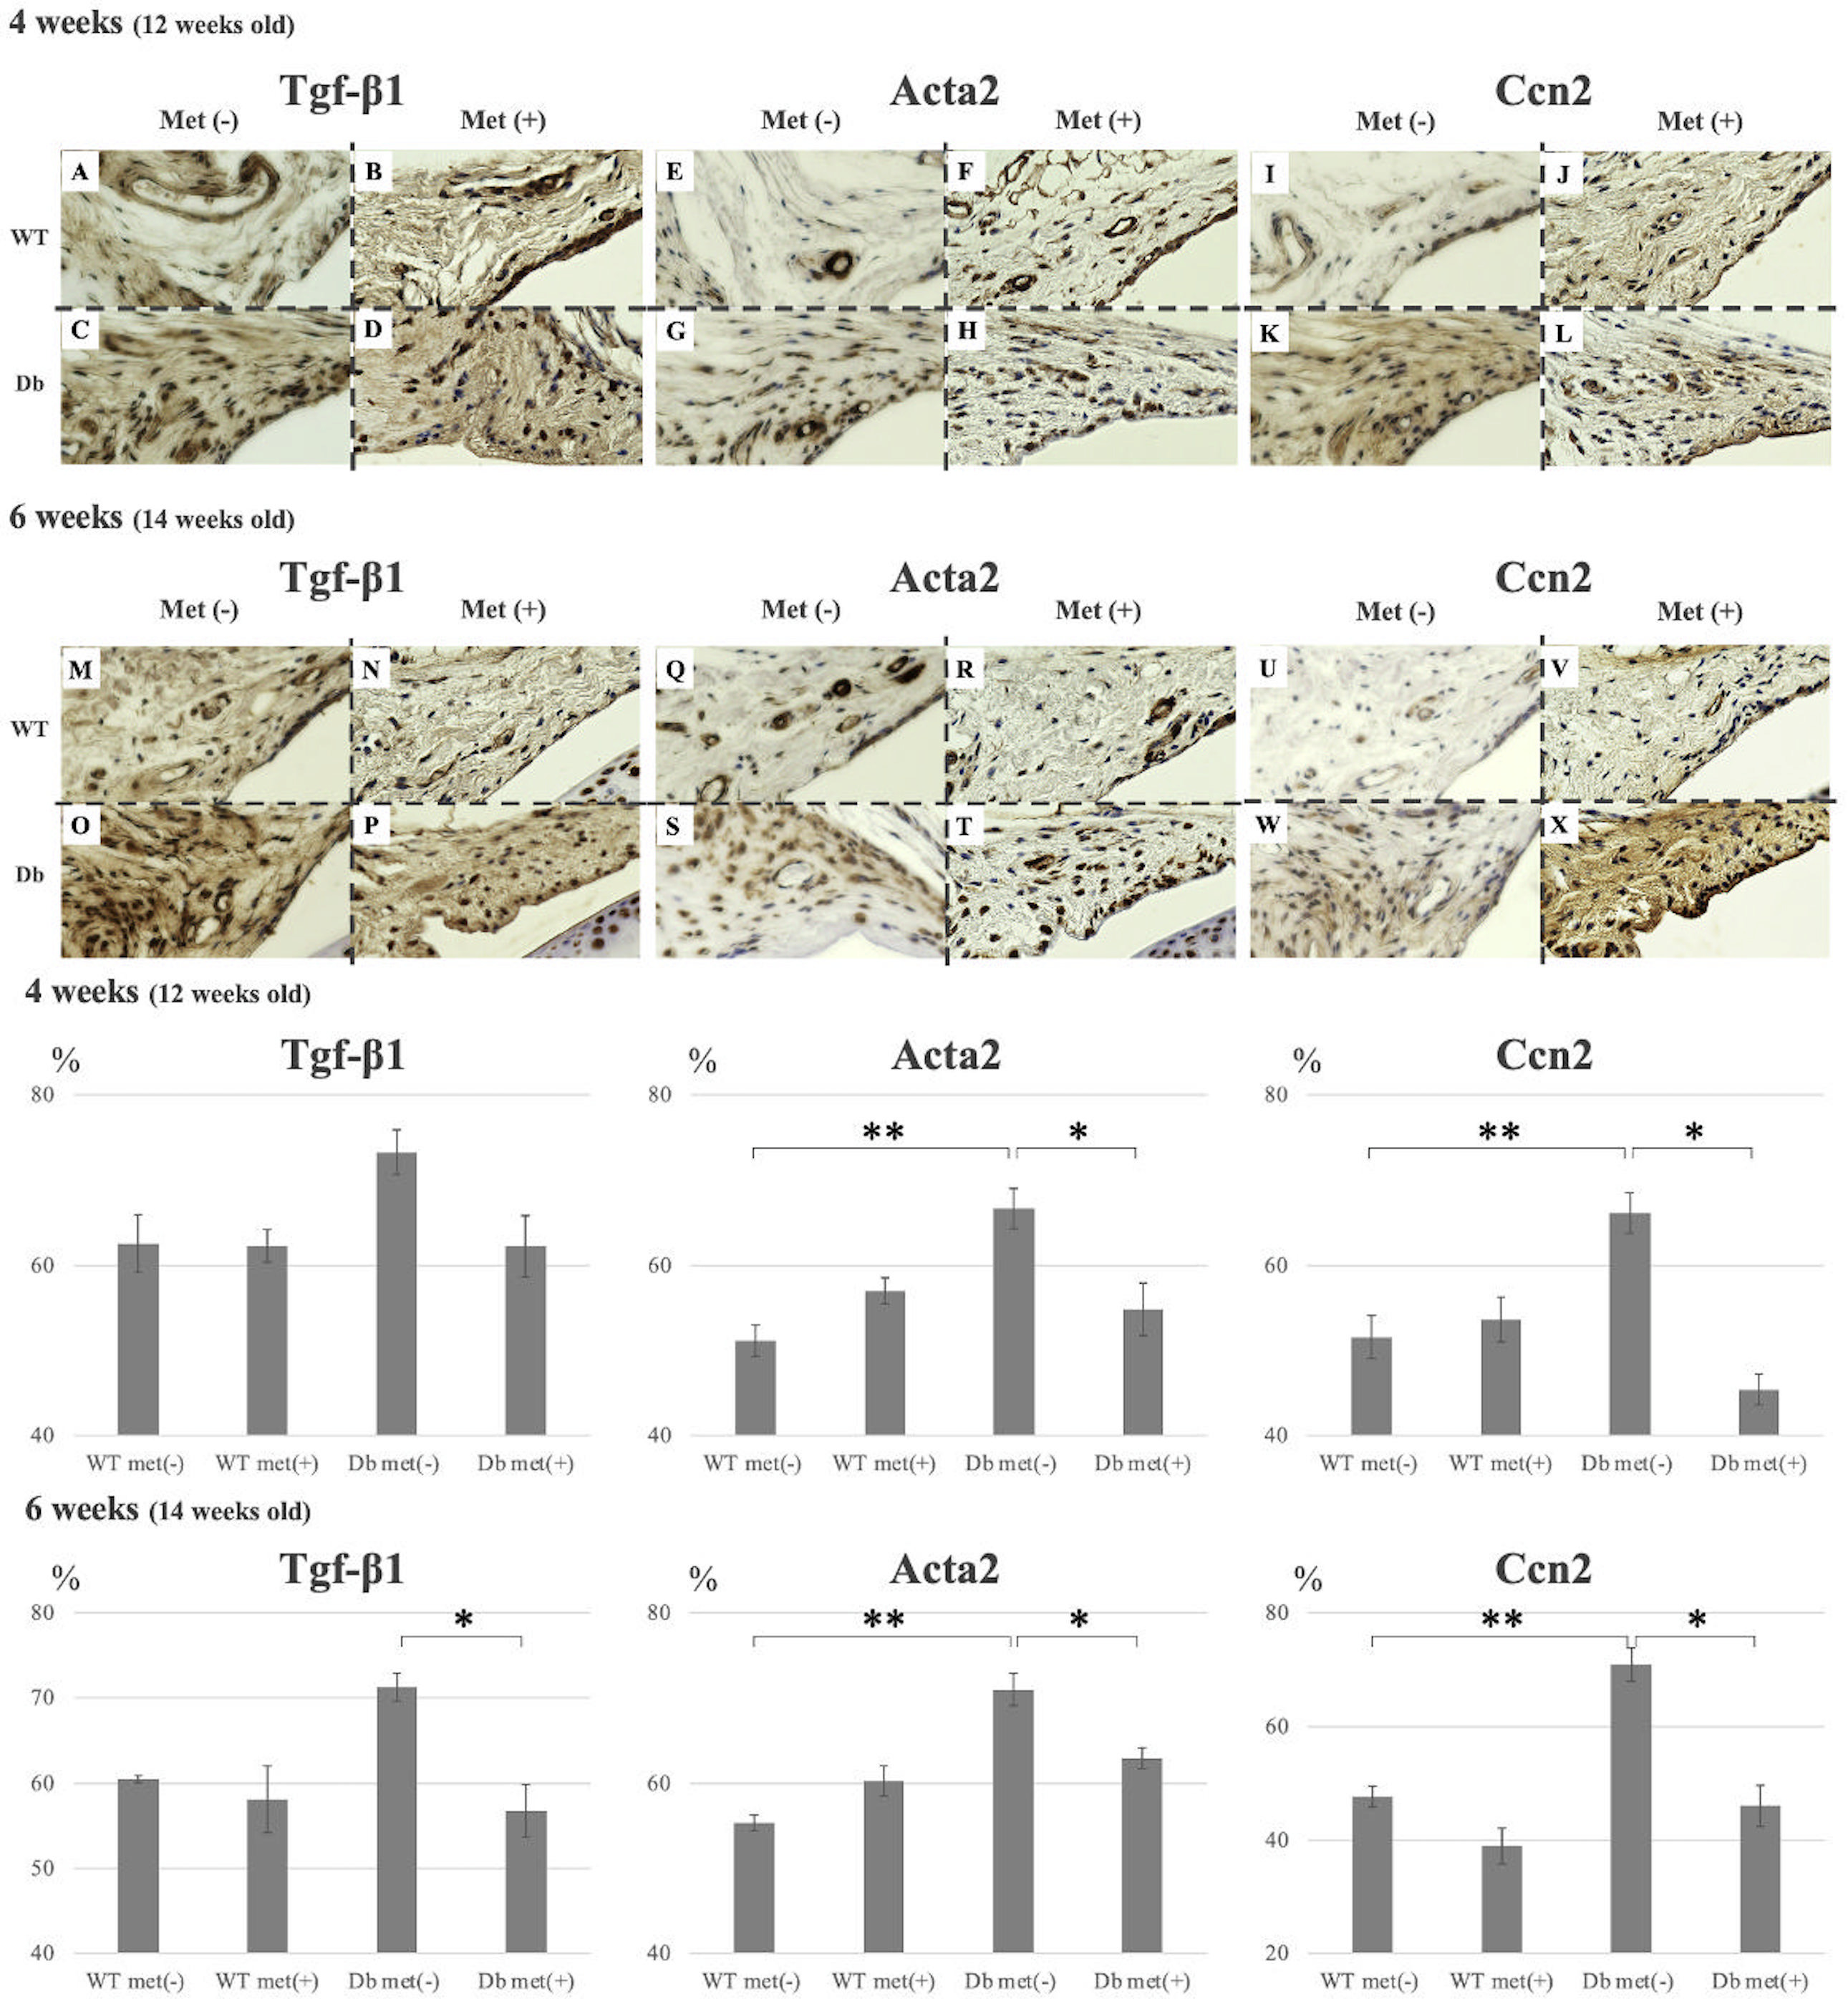 Fig. 4 
            Immunohistochemical analysis of the effect of metformin on the posterior knee joint capsule. The proportion of transforming growth factor β1 (TGFβ1)-positive-, actin α2 (Acta2)-positive-, and cellular communication network factor 2 (Ccn2)-positive cells relative to the total number of cells in the posterior capsule of each group are presented at four and six weeks of metformin treatment. The threshold of the total number of cells was set to 80 ± 10 pixels (px) for each image, and that of each type of positive cell was set to 25 ± 5 px. Data are expressed as mean and standard error of the mean (SEM). *p < 0.05, **p < 0.01; n = 6. At four weeks (12 weeks old), TGF-β1 A: wild-type (WT) met(-), B: WT met(+), C: diabetes mellitus (Db) met(-), D: Db met(+); Acta2 E: WT met(-), F: WT met(+), G: Db met(-), H: Db met(+); Ccn2 I: WT met(-), J: WT met(+), K: Db met(-), L: Db met(+); at six weeks (14 weeks old), TGF-β1 M: WT met(-), N: WT met(+), O: Db met(-), P: Db met(+); Acta2 Q: WT met(-), R: WT met(+), S: Db met(-), T: Db met(+); Ccn2 U: WT met(-), V: WT met(+), W: Db met(-), X: Db met(+).
          